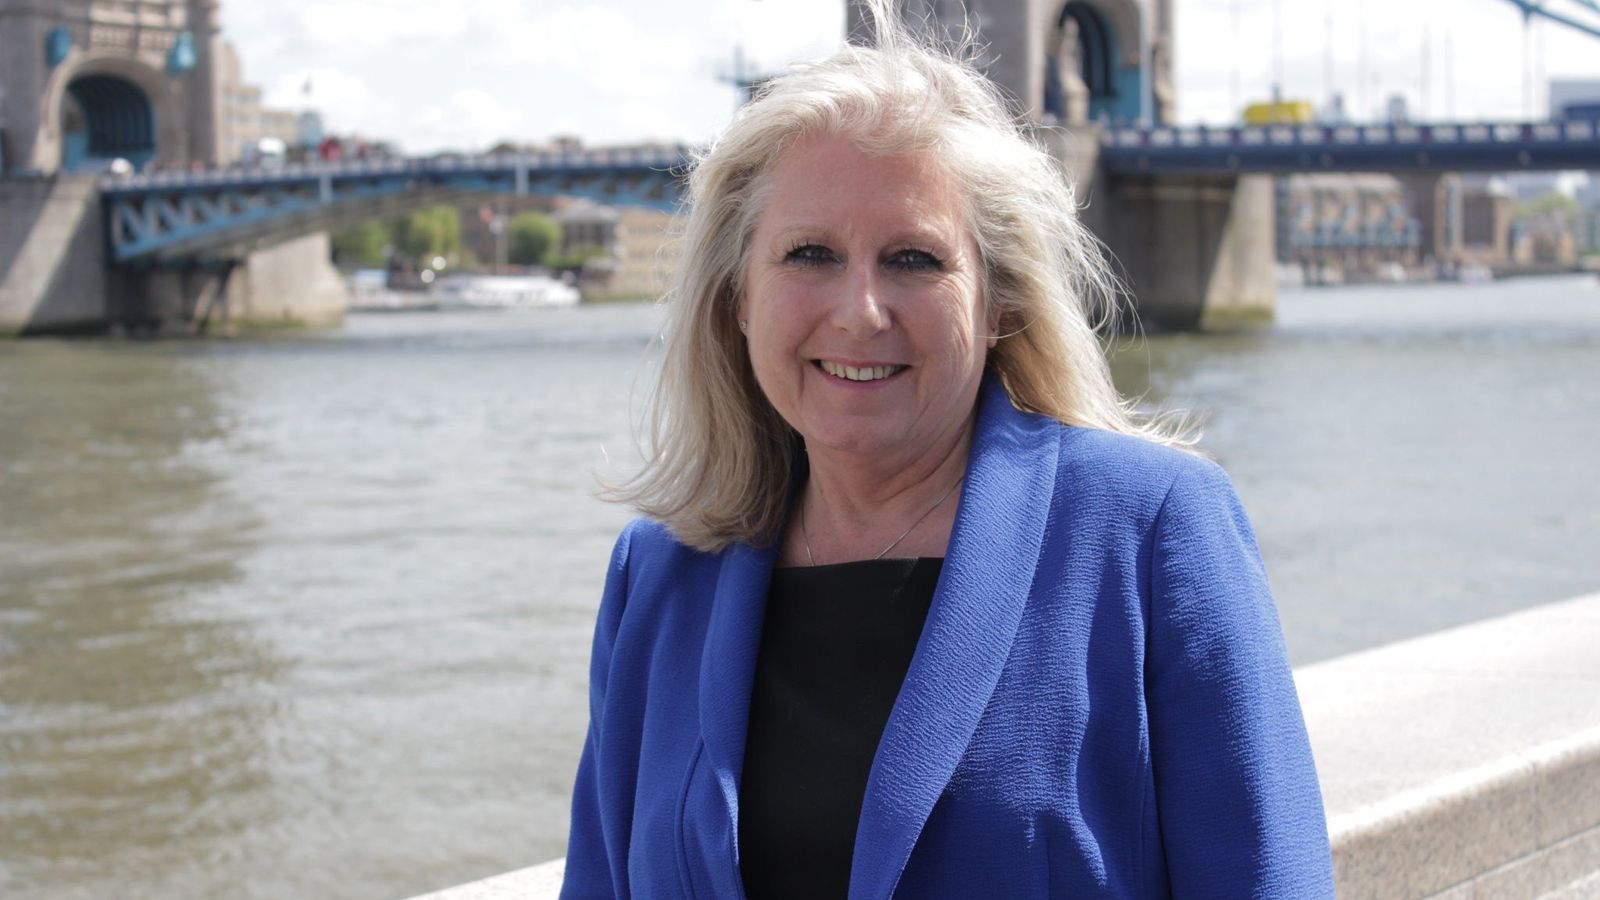 Susan Hall announced as Conservative candidate for London mayor